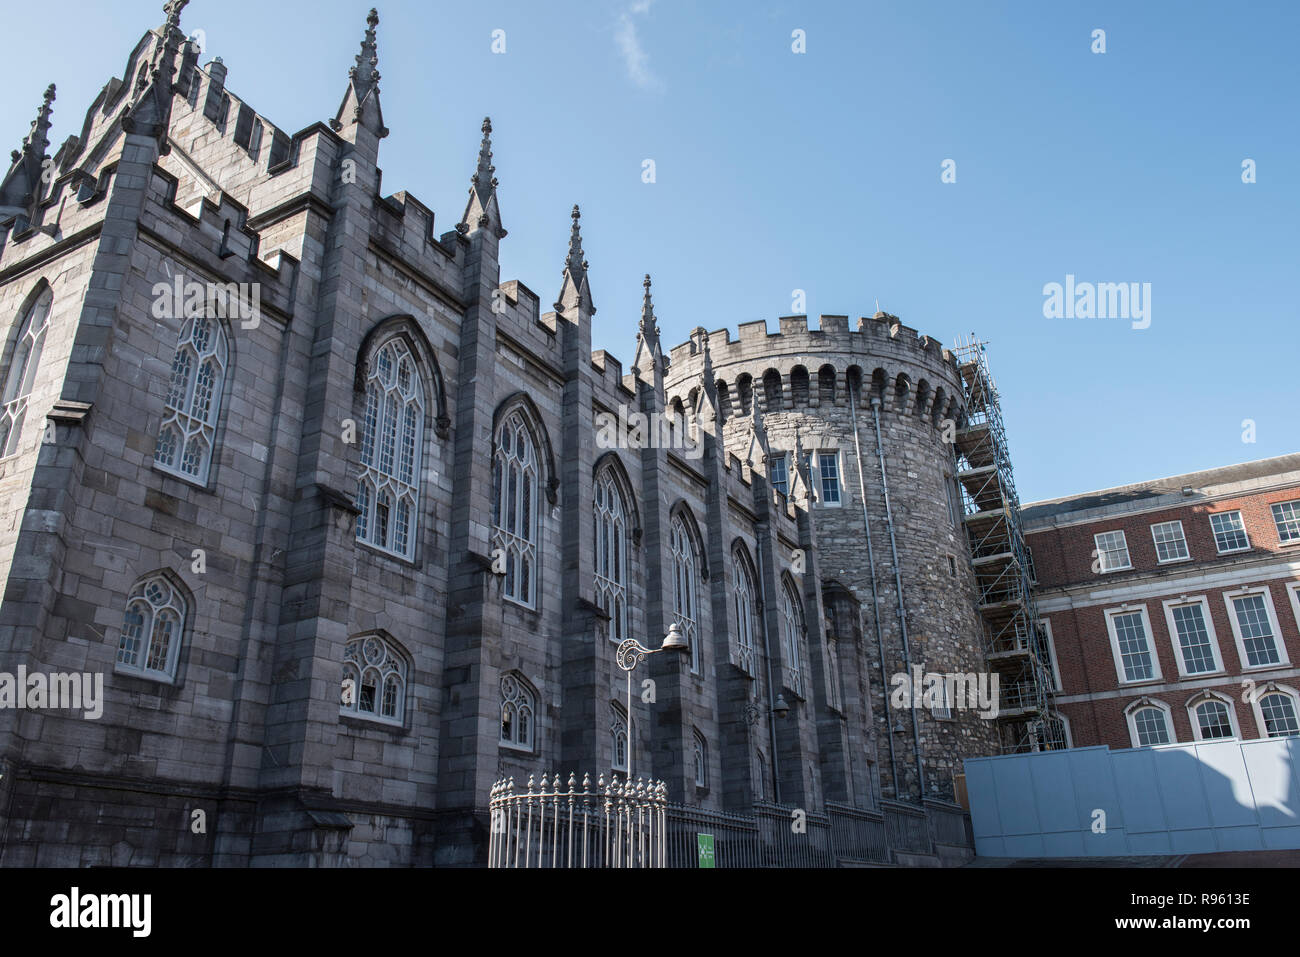 View of the side of Dublin Castle, which is one of the most famous buildings in Ireland. The architecture is Neoclassical and looks stunning. Clear bl Stock Photo